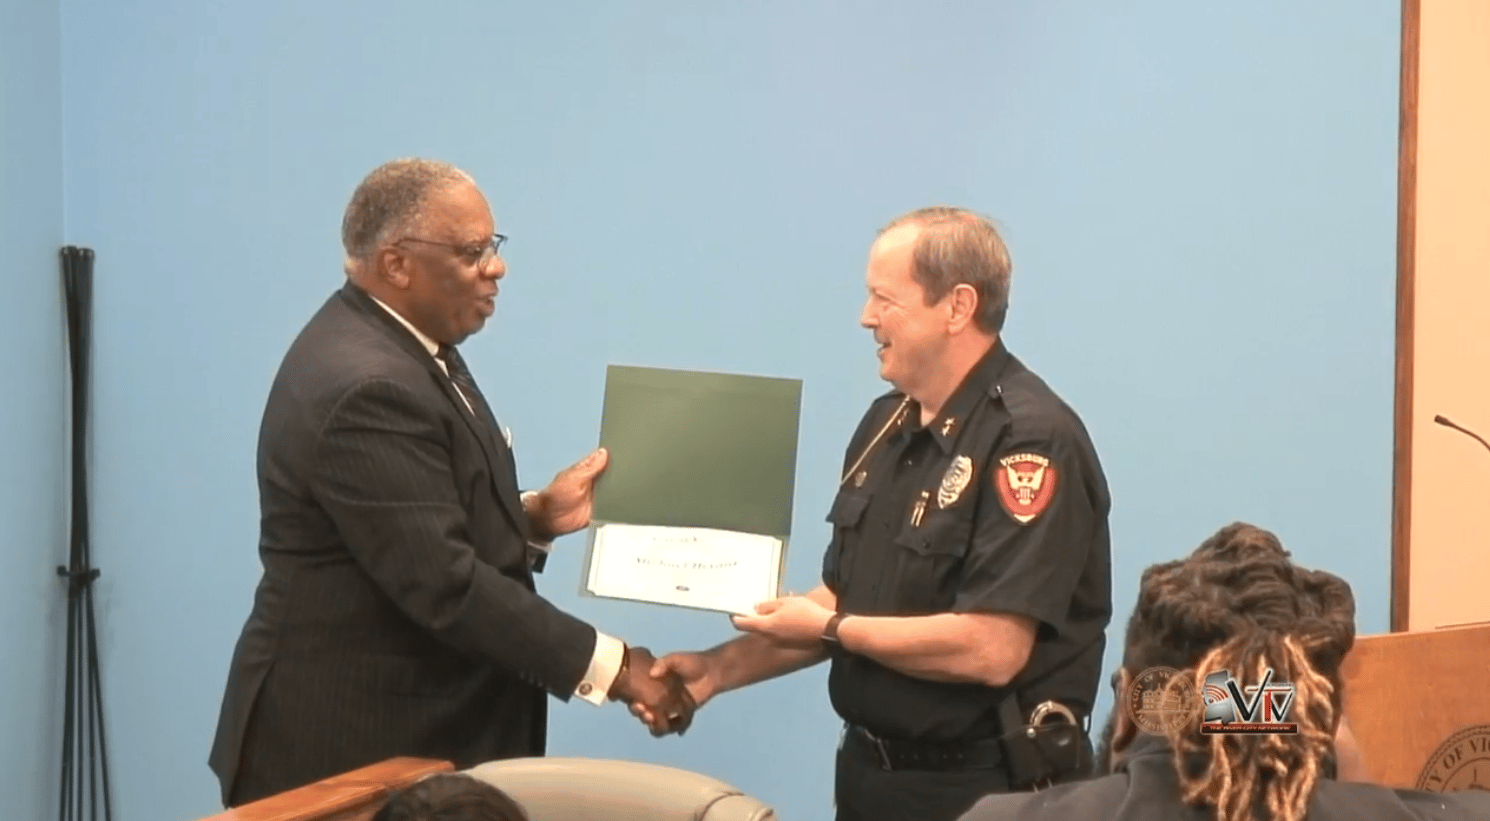 Deputy Chief Mike Bryant 30 years of service